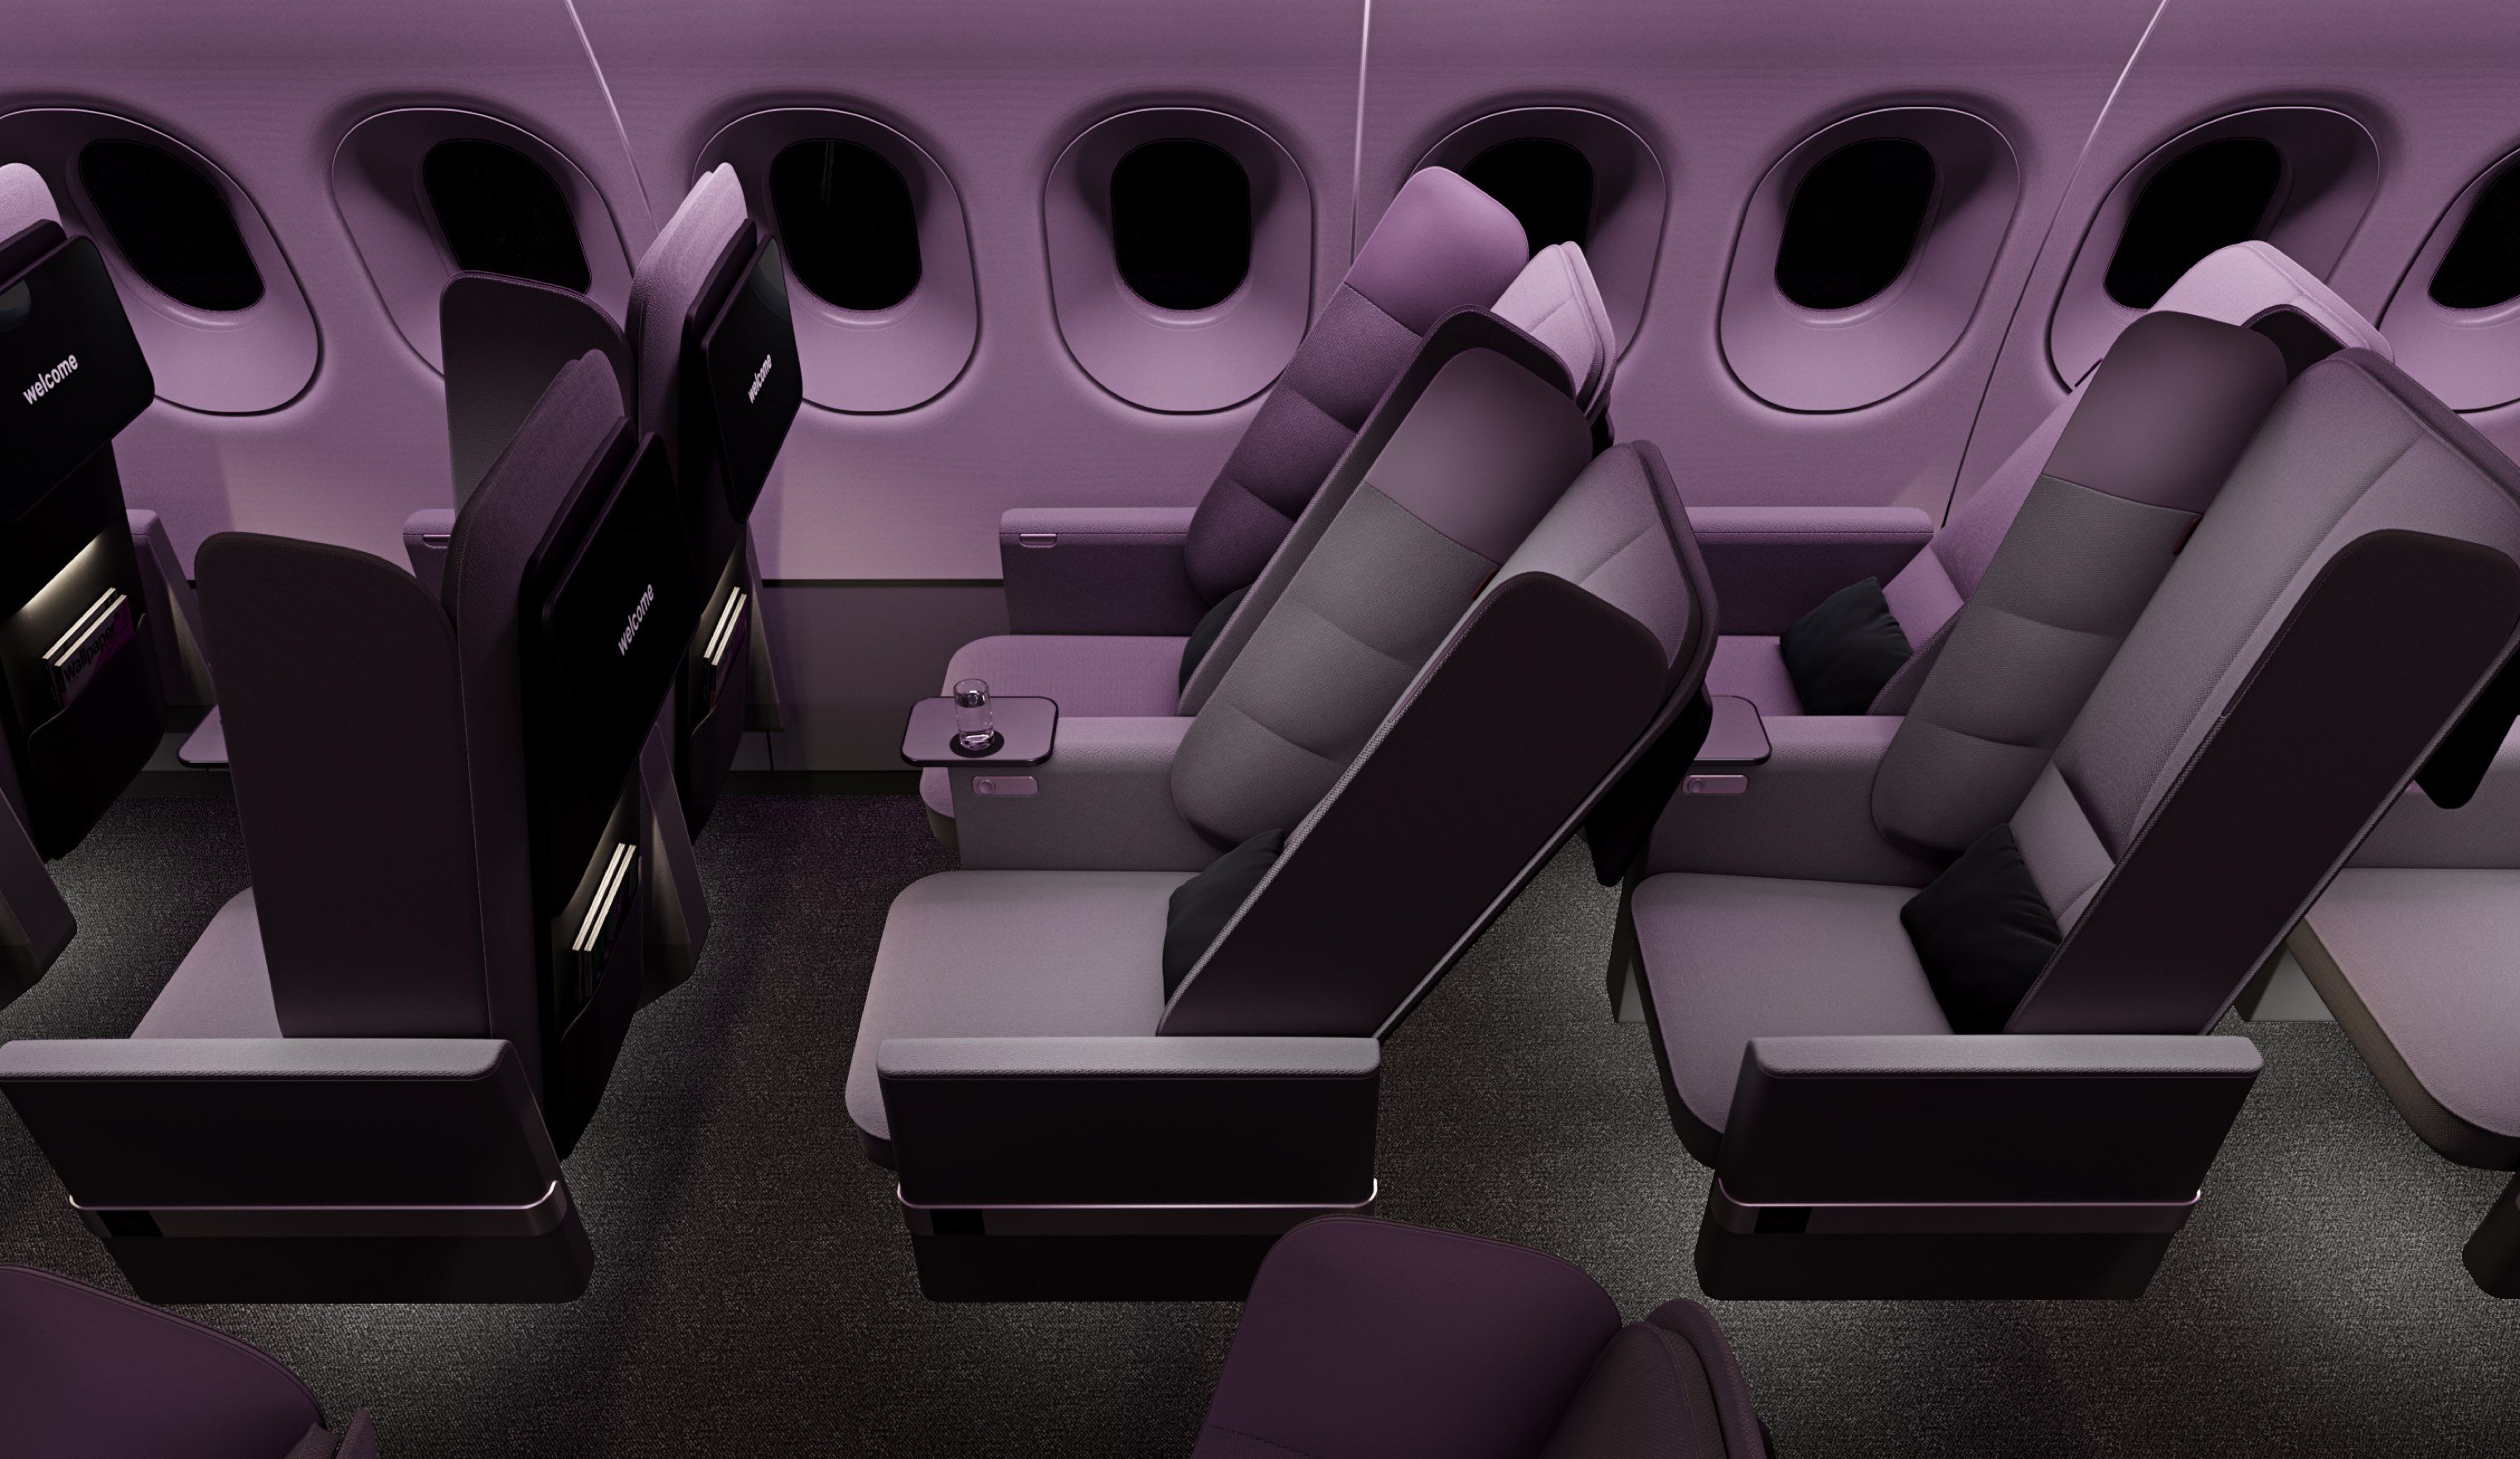 How to Sleep on a Plane - New Airplane Seat Design